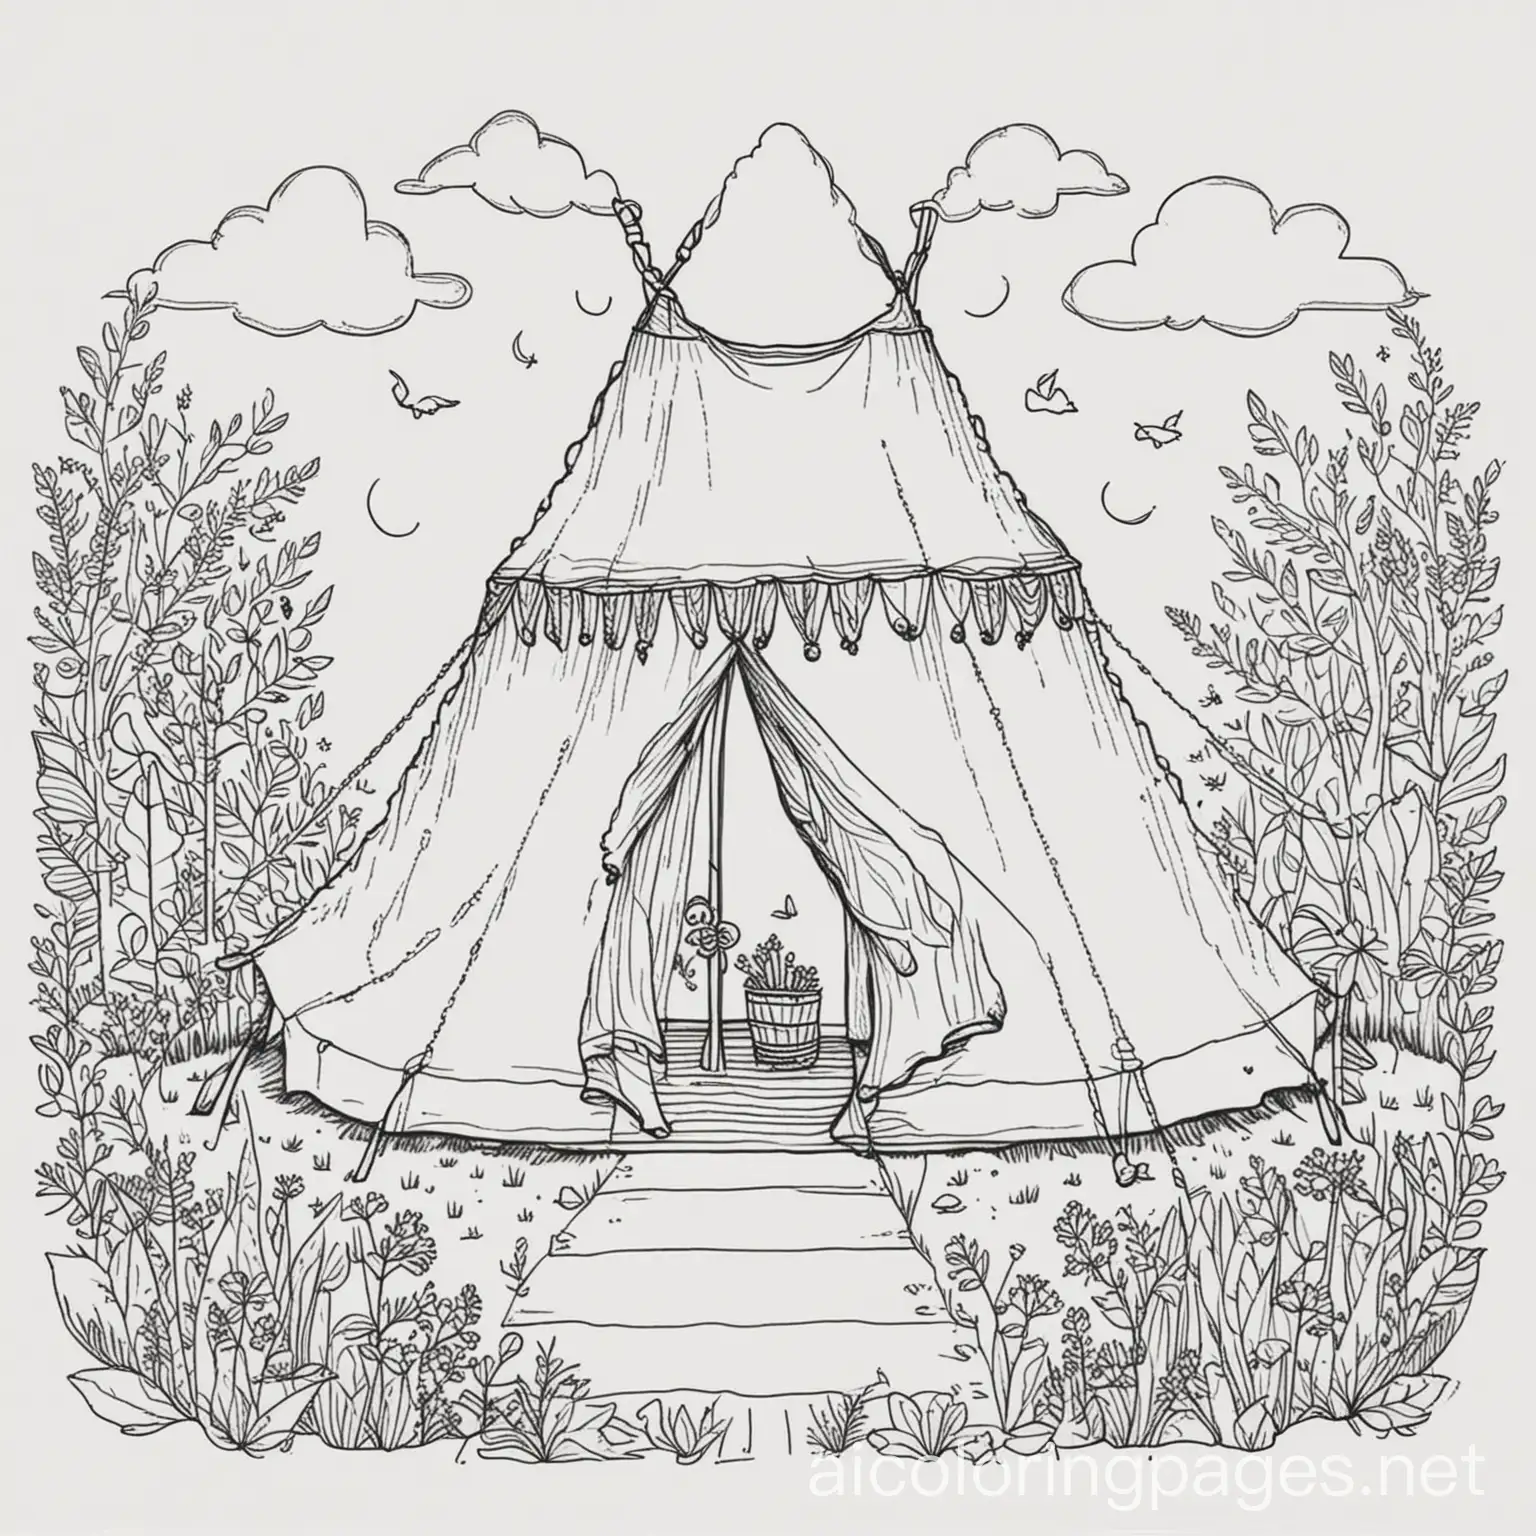 a Cute tent at a festival for adults , Coloring Page, black and white, line art, white background, Simplicity, Ample White Space. The background of the coloring page is plain white. The outlines of all the subjects are easy to distinguish, making it simple to color without too much difficulty, lots of patterns, boho style, Coloring Page, black and white, line art, white background, Simplicity, Ample White Space. The background of the coloring page is plain white to make it easy for young children to color within the lines. The outlines of all the subjects are easy to distinguish, making it simple for kids to color without too much difficulty